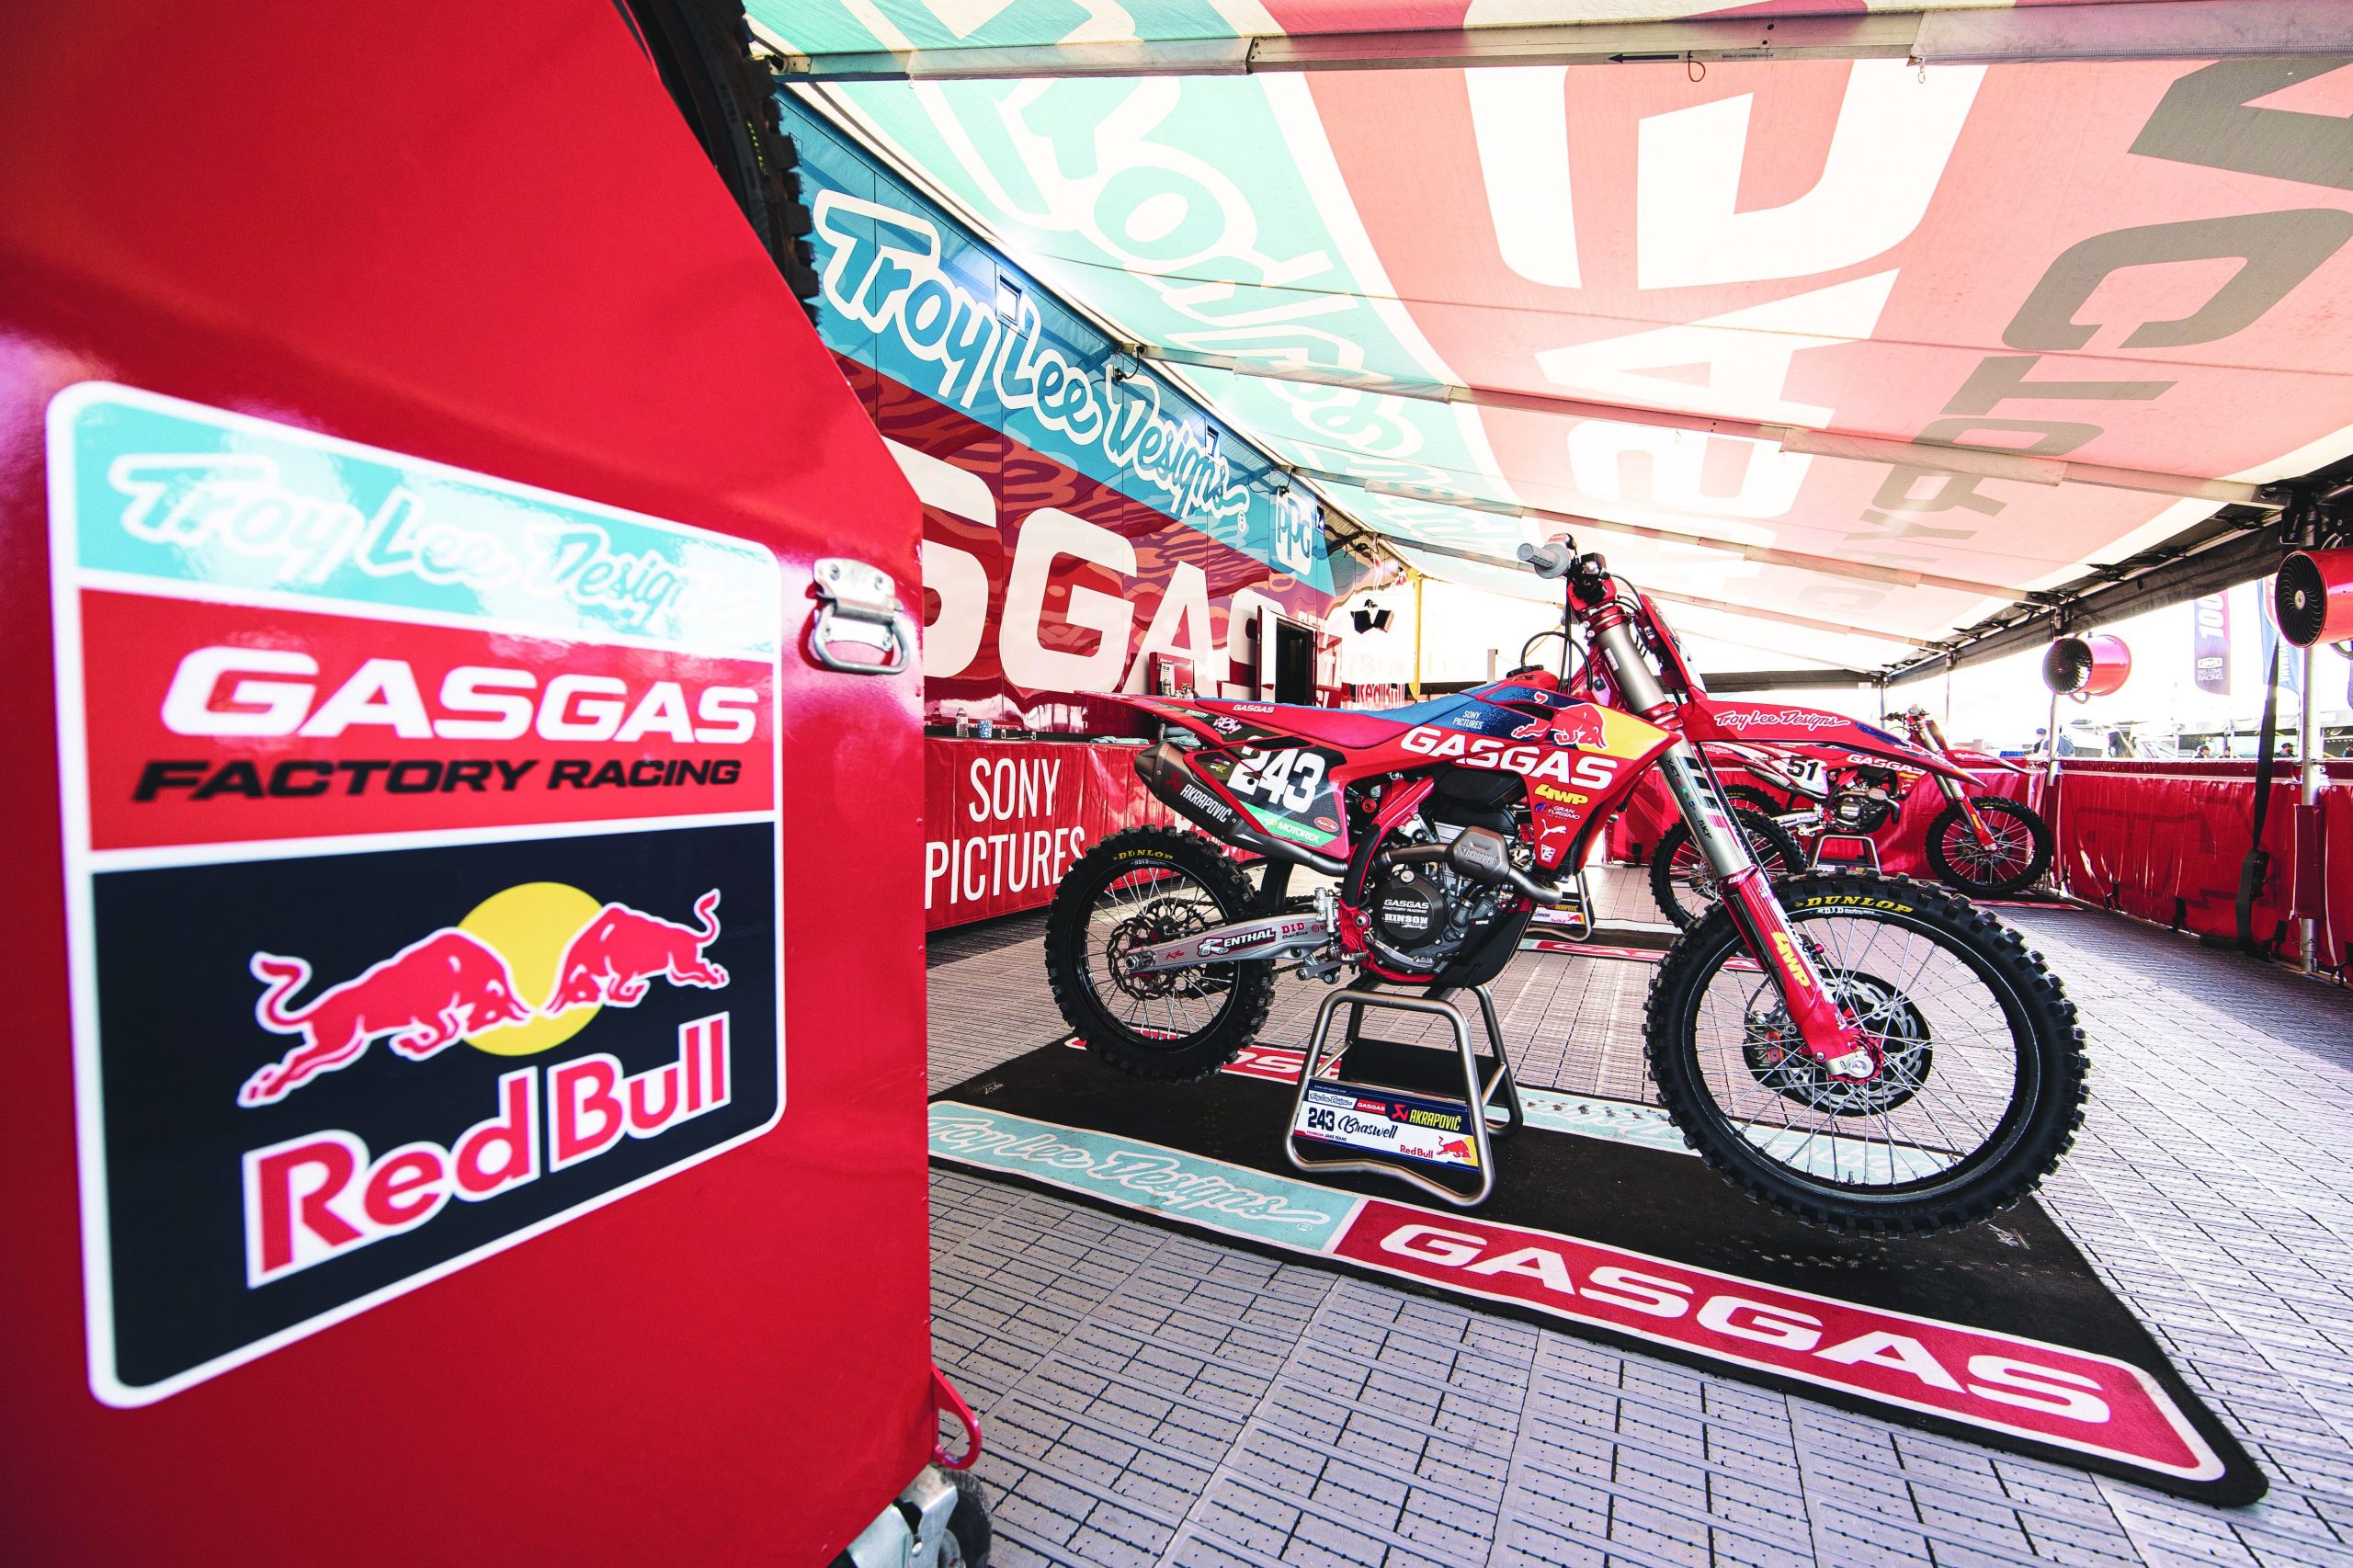 Troy Lee Designs Red Bull GASGAS Team looks to Thunder Valley and beyond